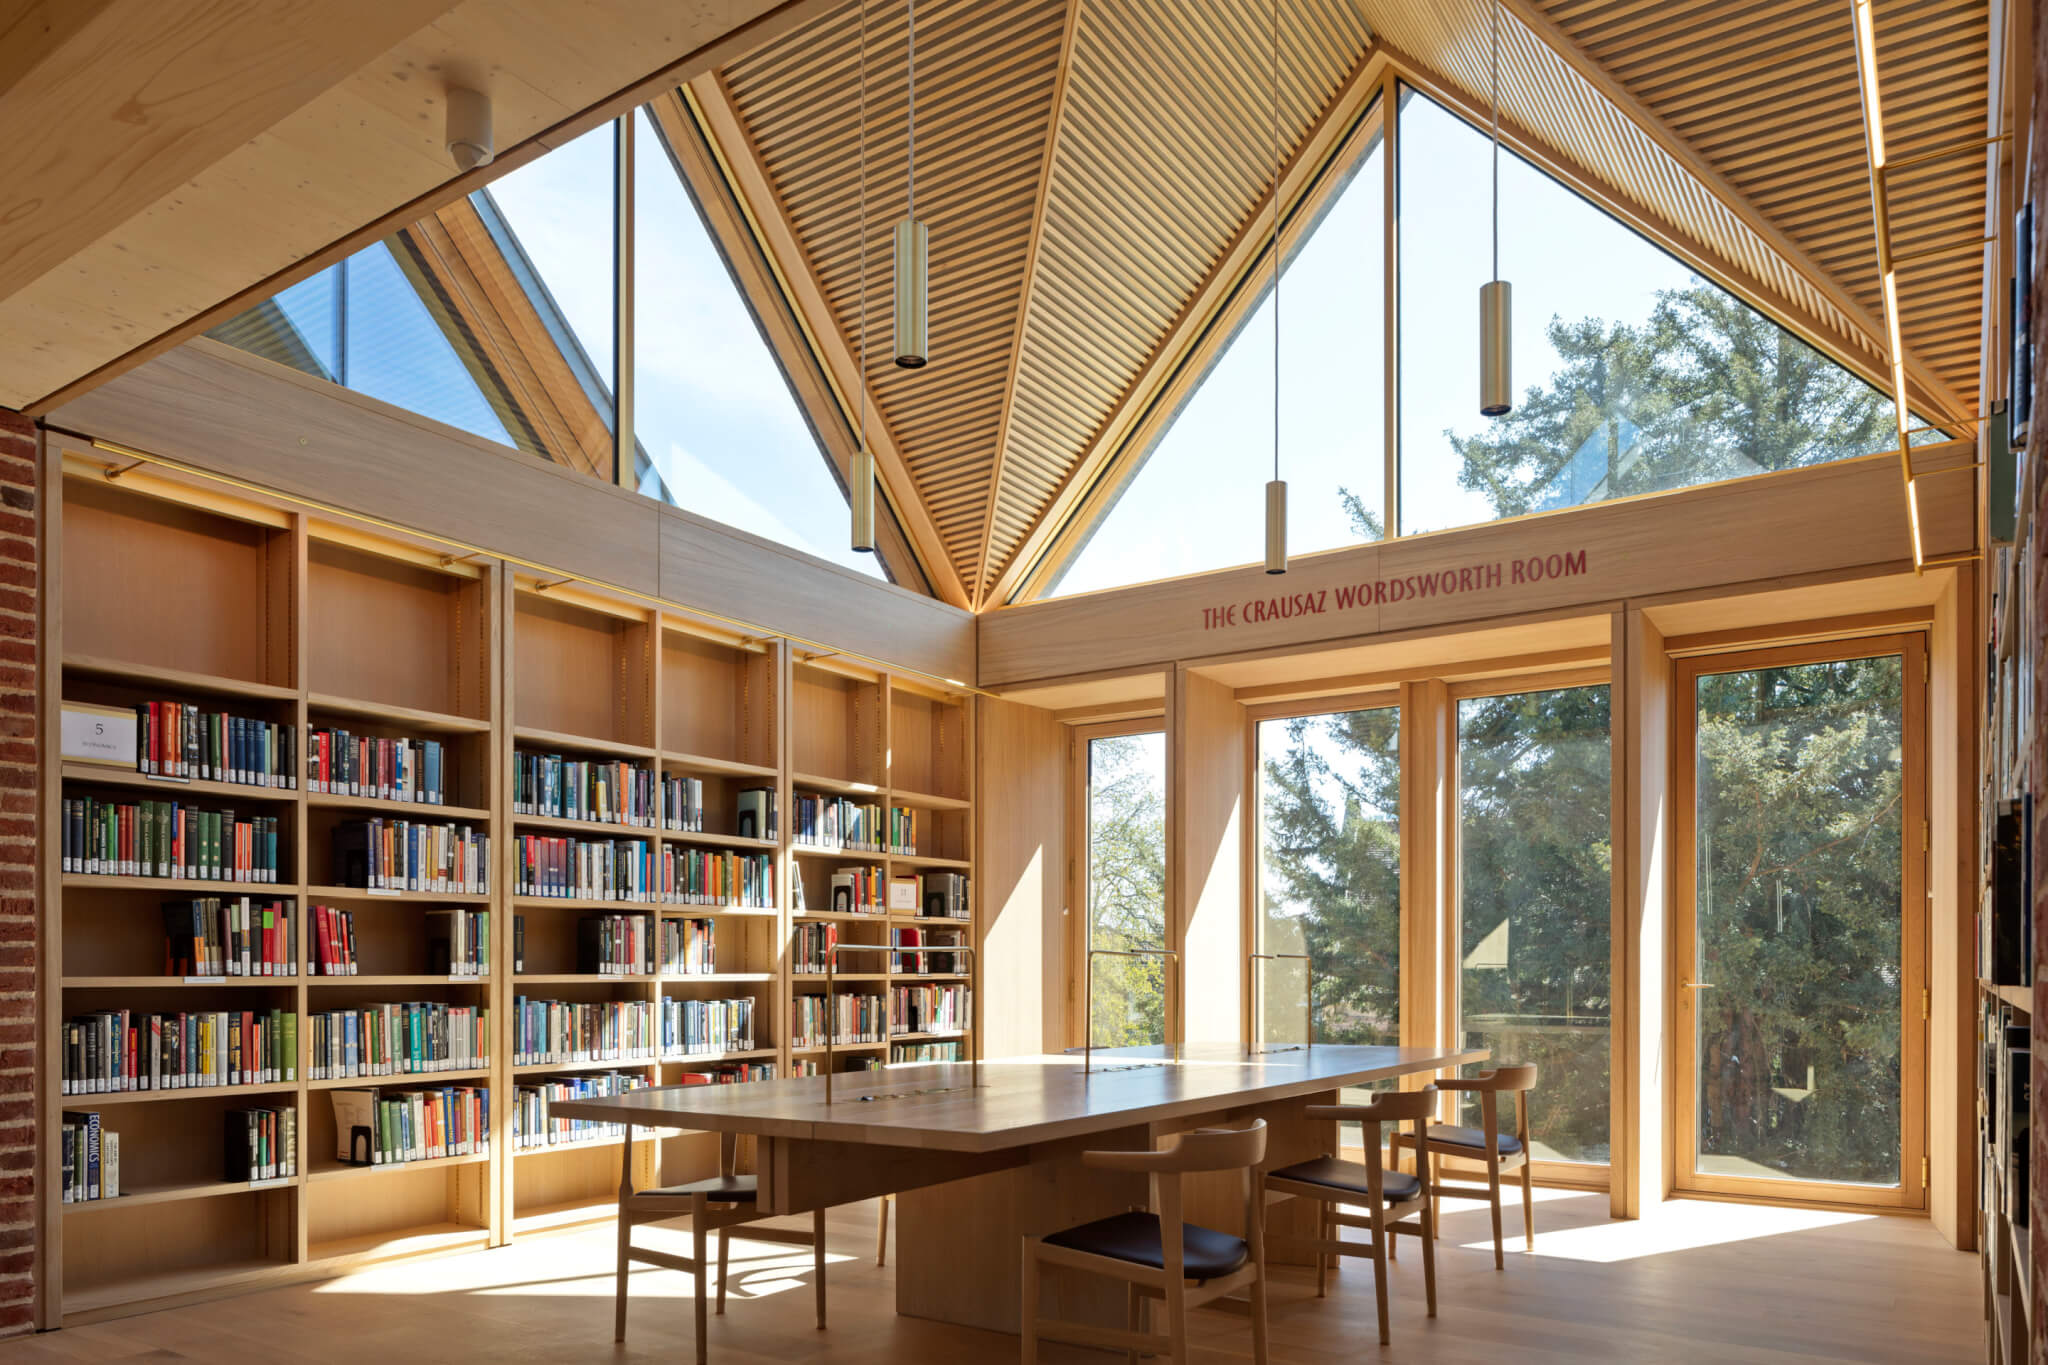 vaulted timber ceiling in a library study room